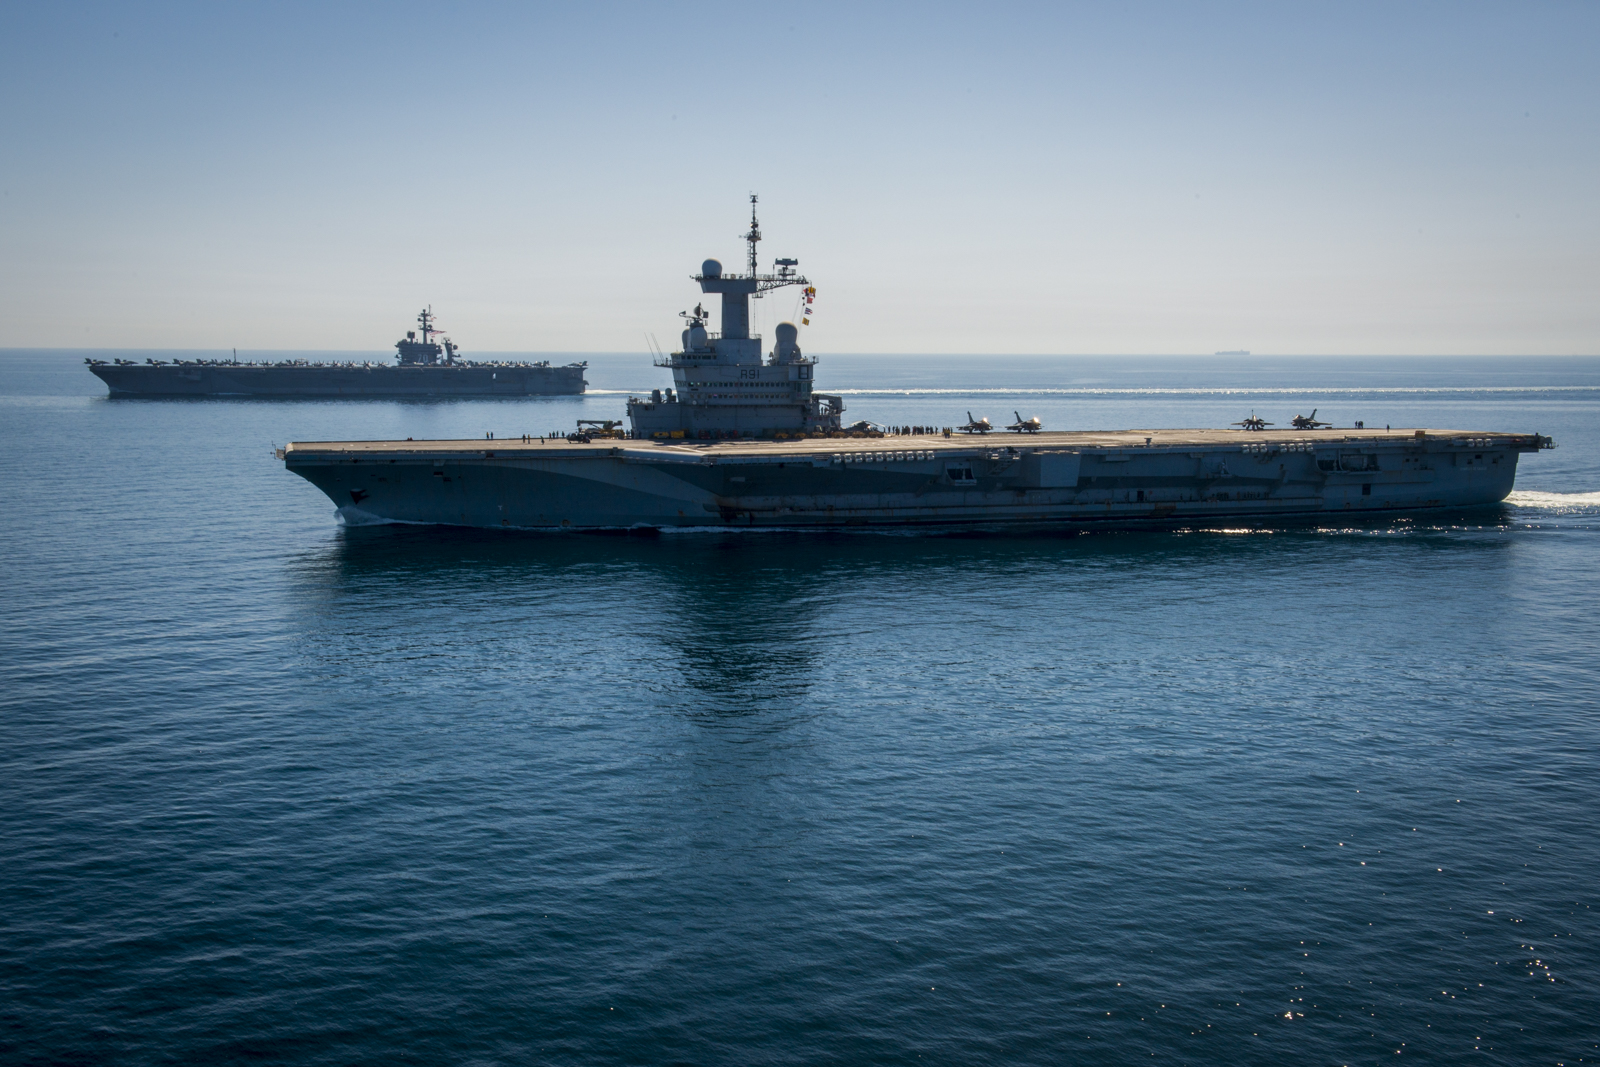 The aircraft carrier USS Carl Vinson (CVN-70), left, and the French nuclear aircraft carrier Charles de Gaulle (R91) transit the Northern Arabian Gulf on March 8, 2015. US Navy photo.